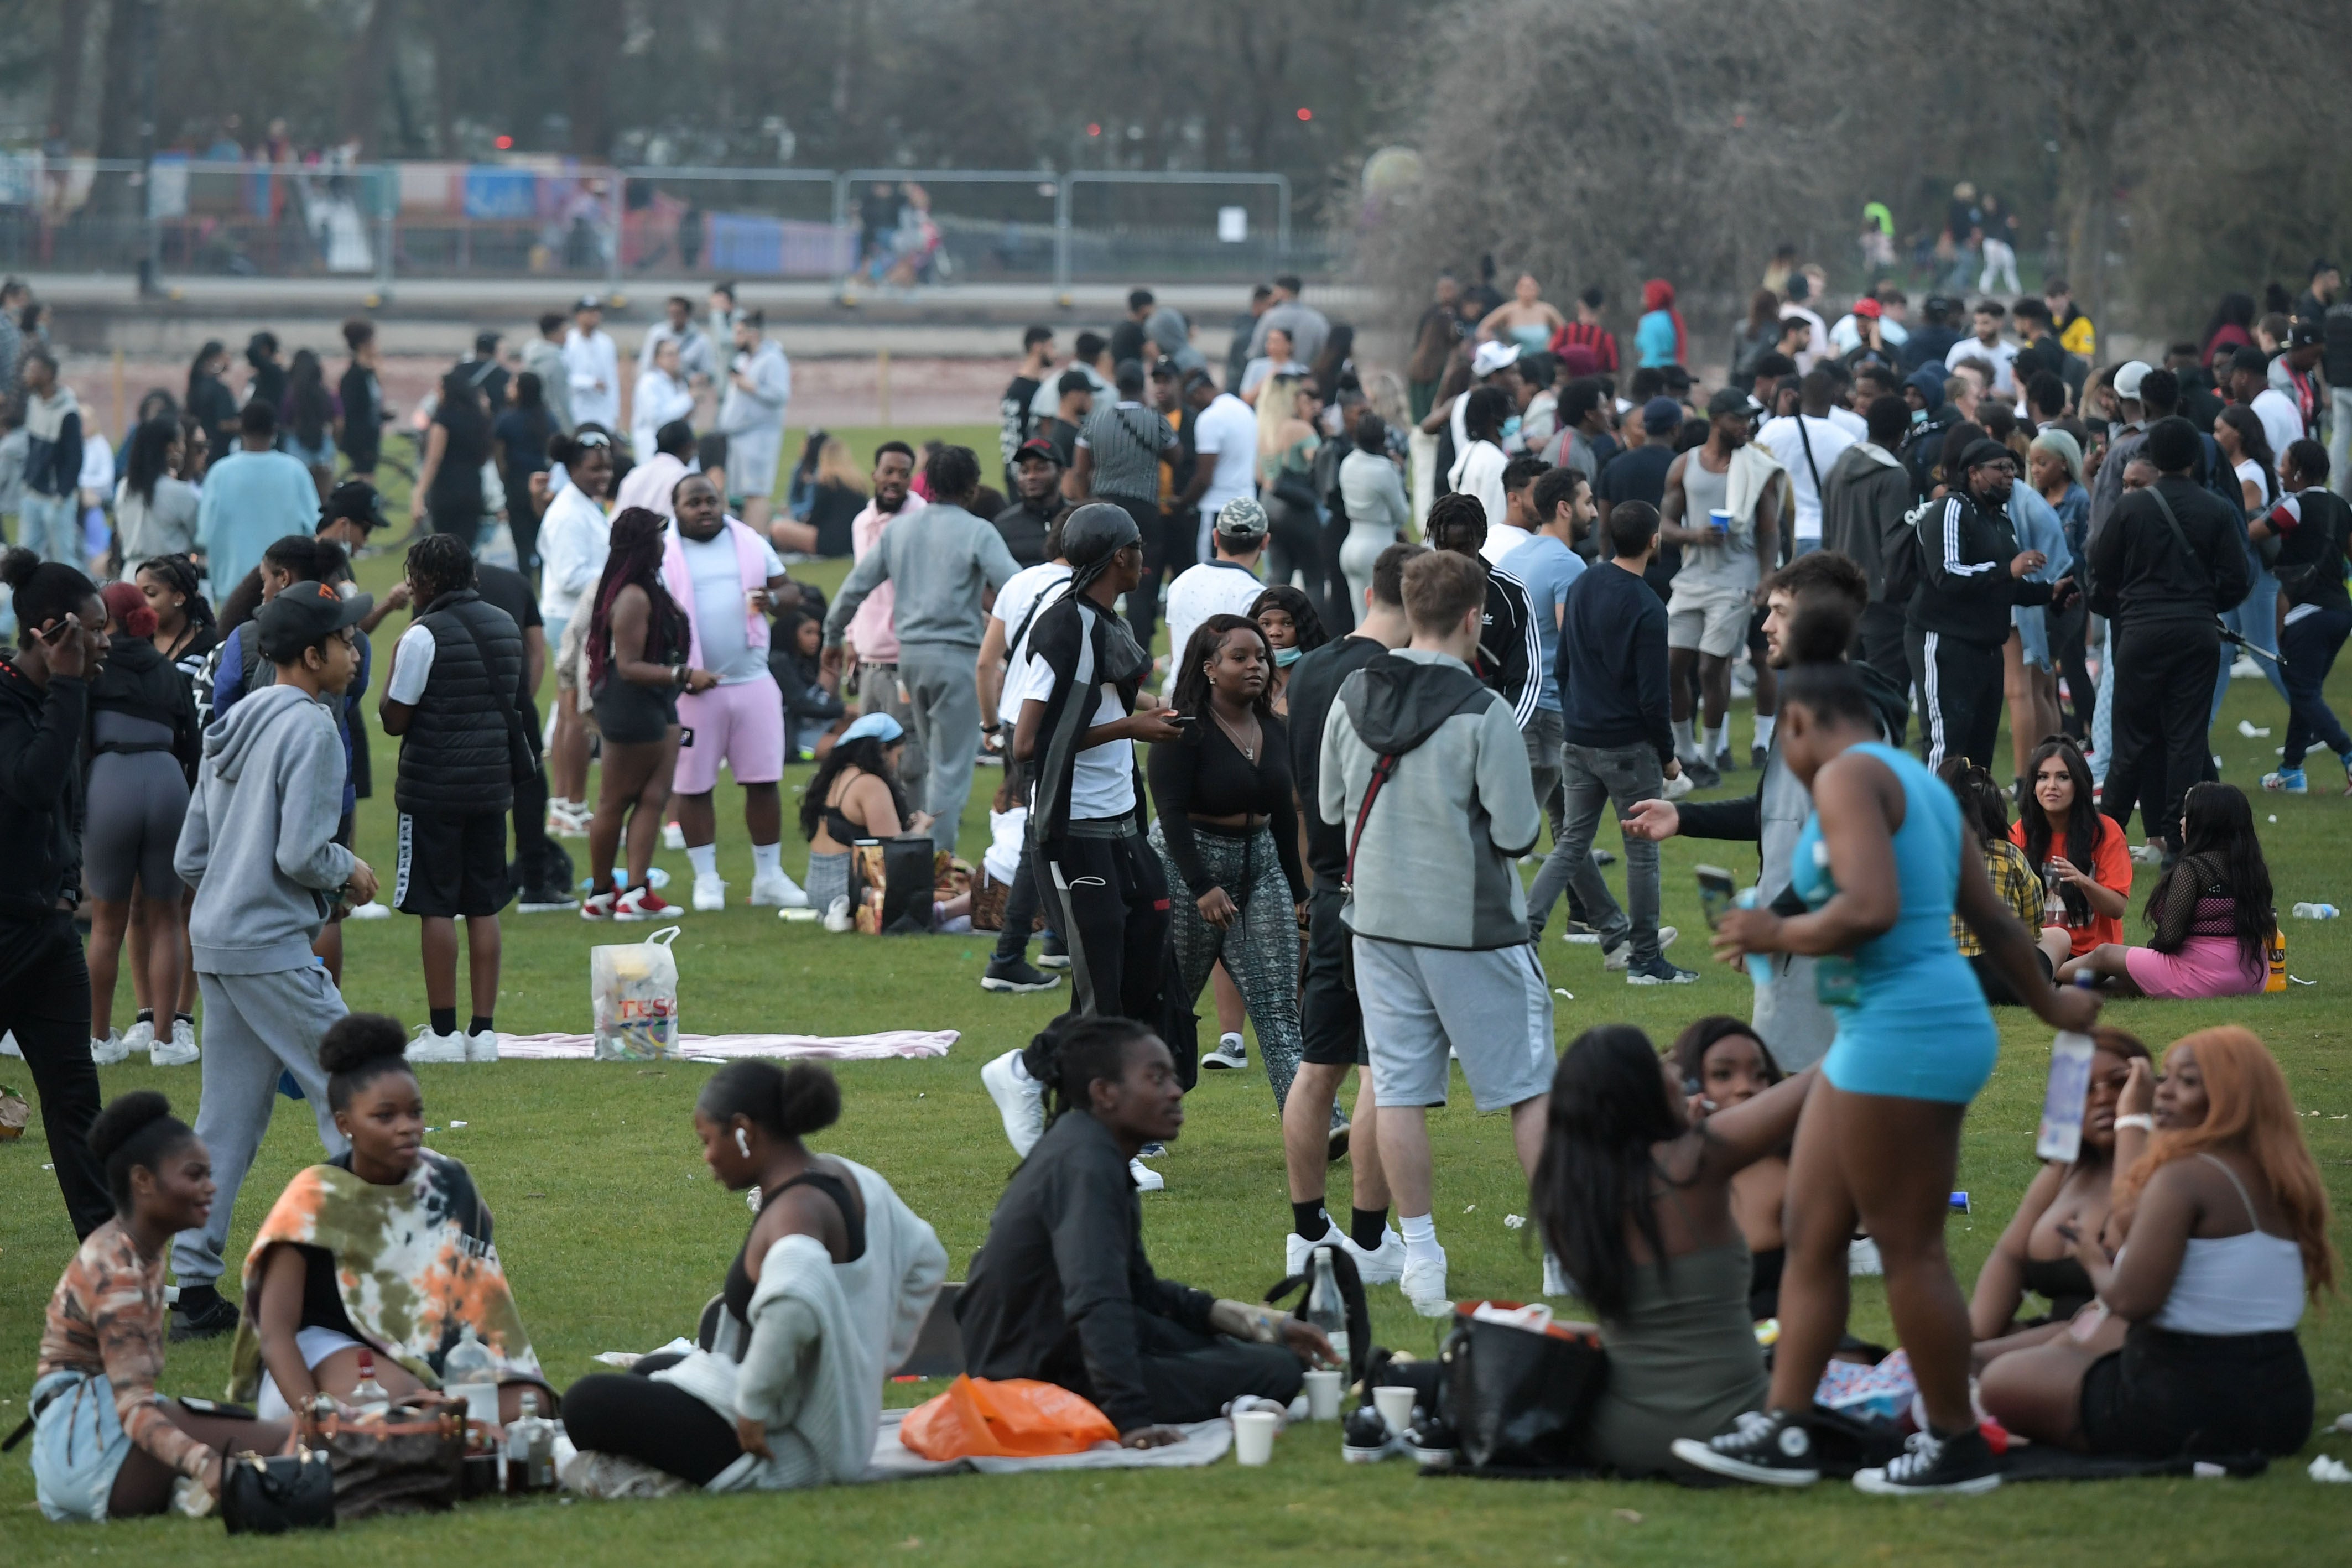 Revellers packed into Cannon Hill Park in Birmingham on Tuesday